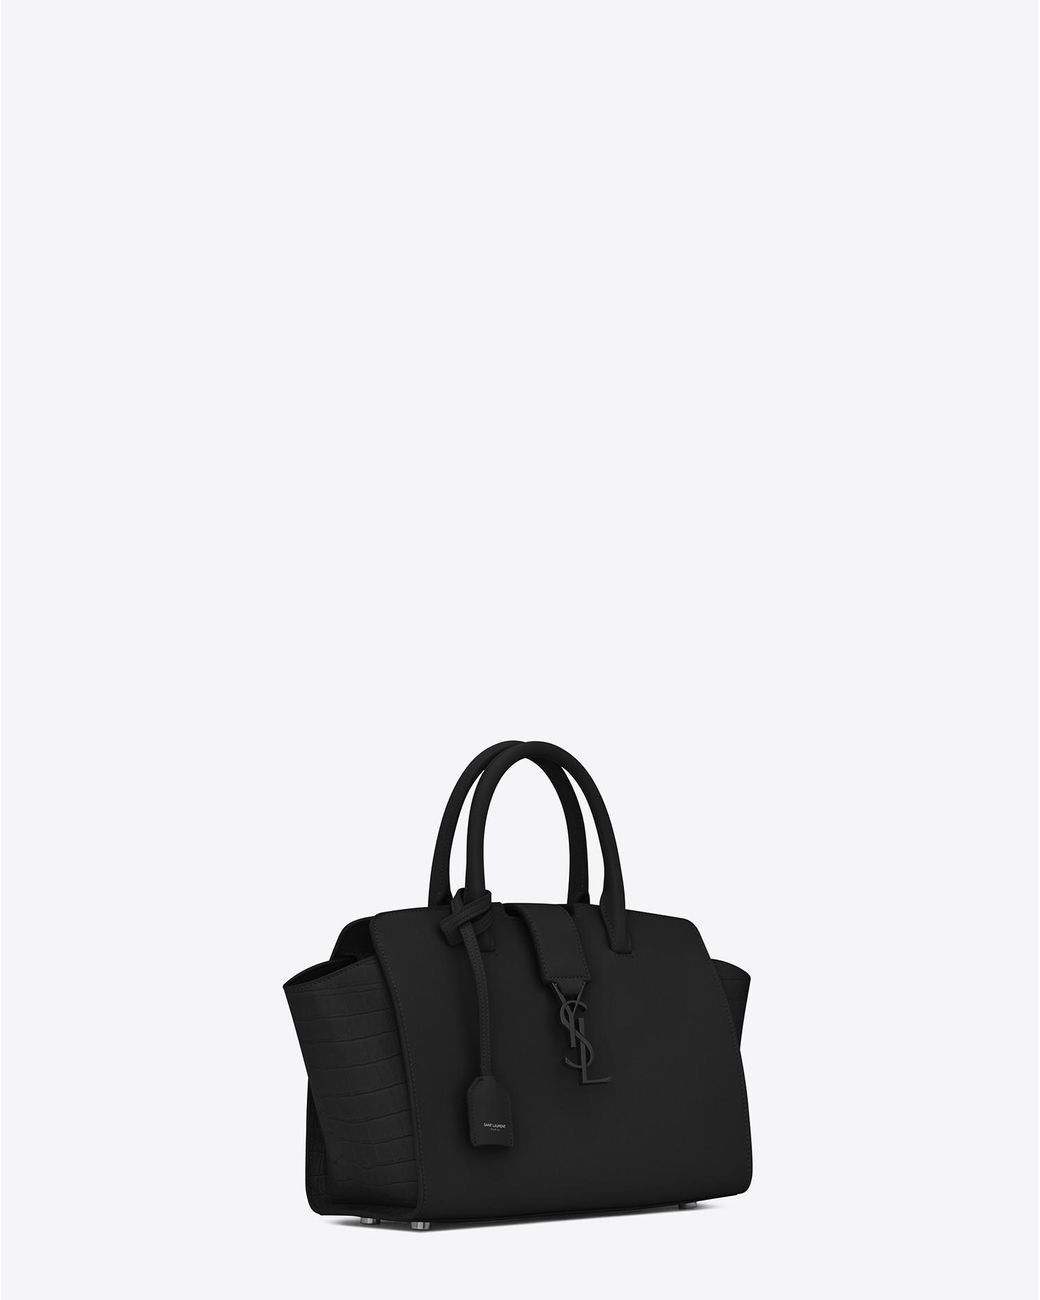 Saint Laurent Black Croc Embossed Leather Baby Downtown Cabas Tote